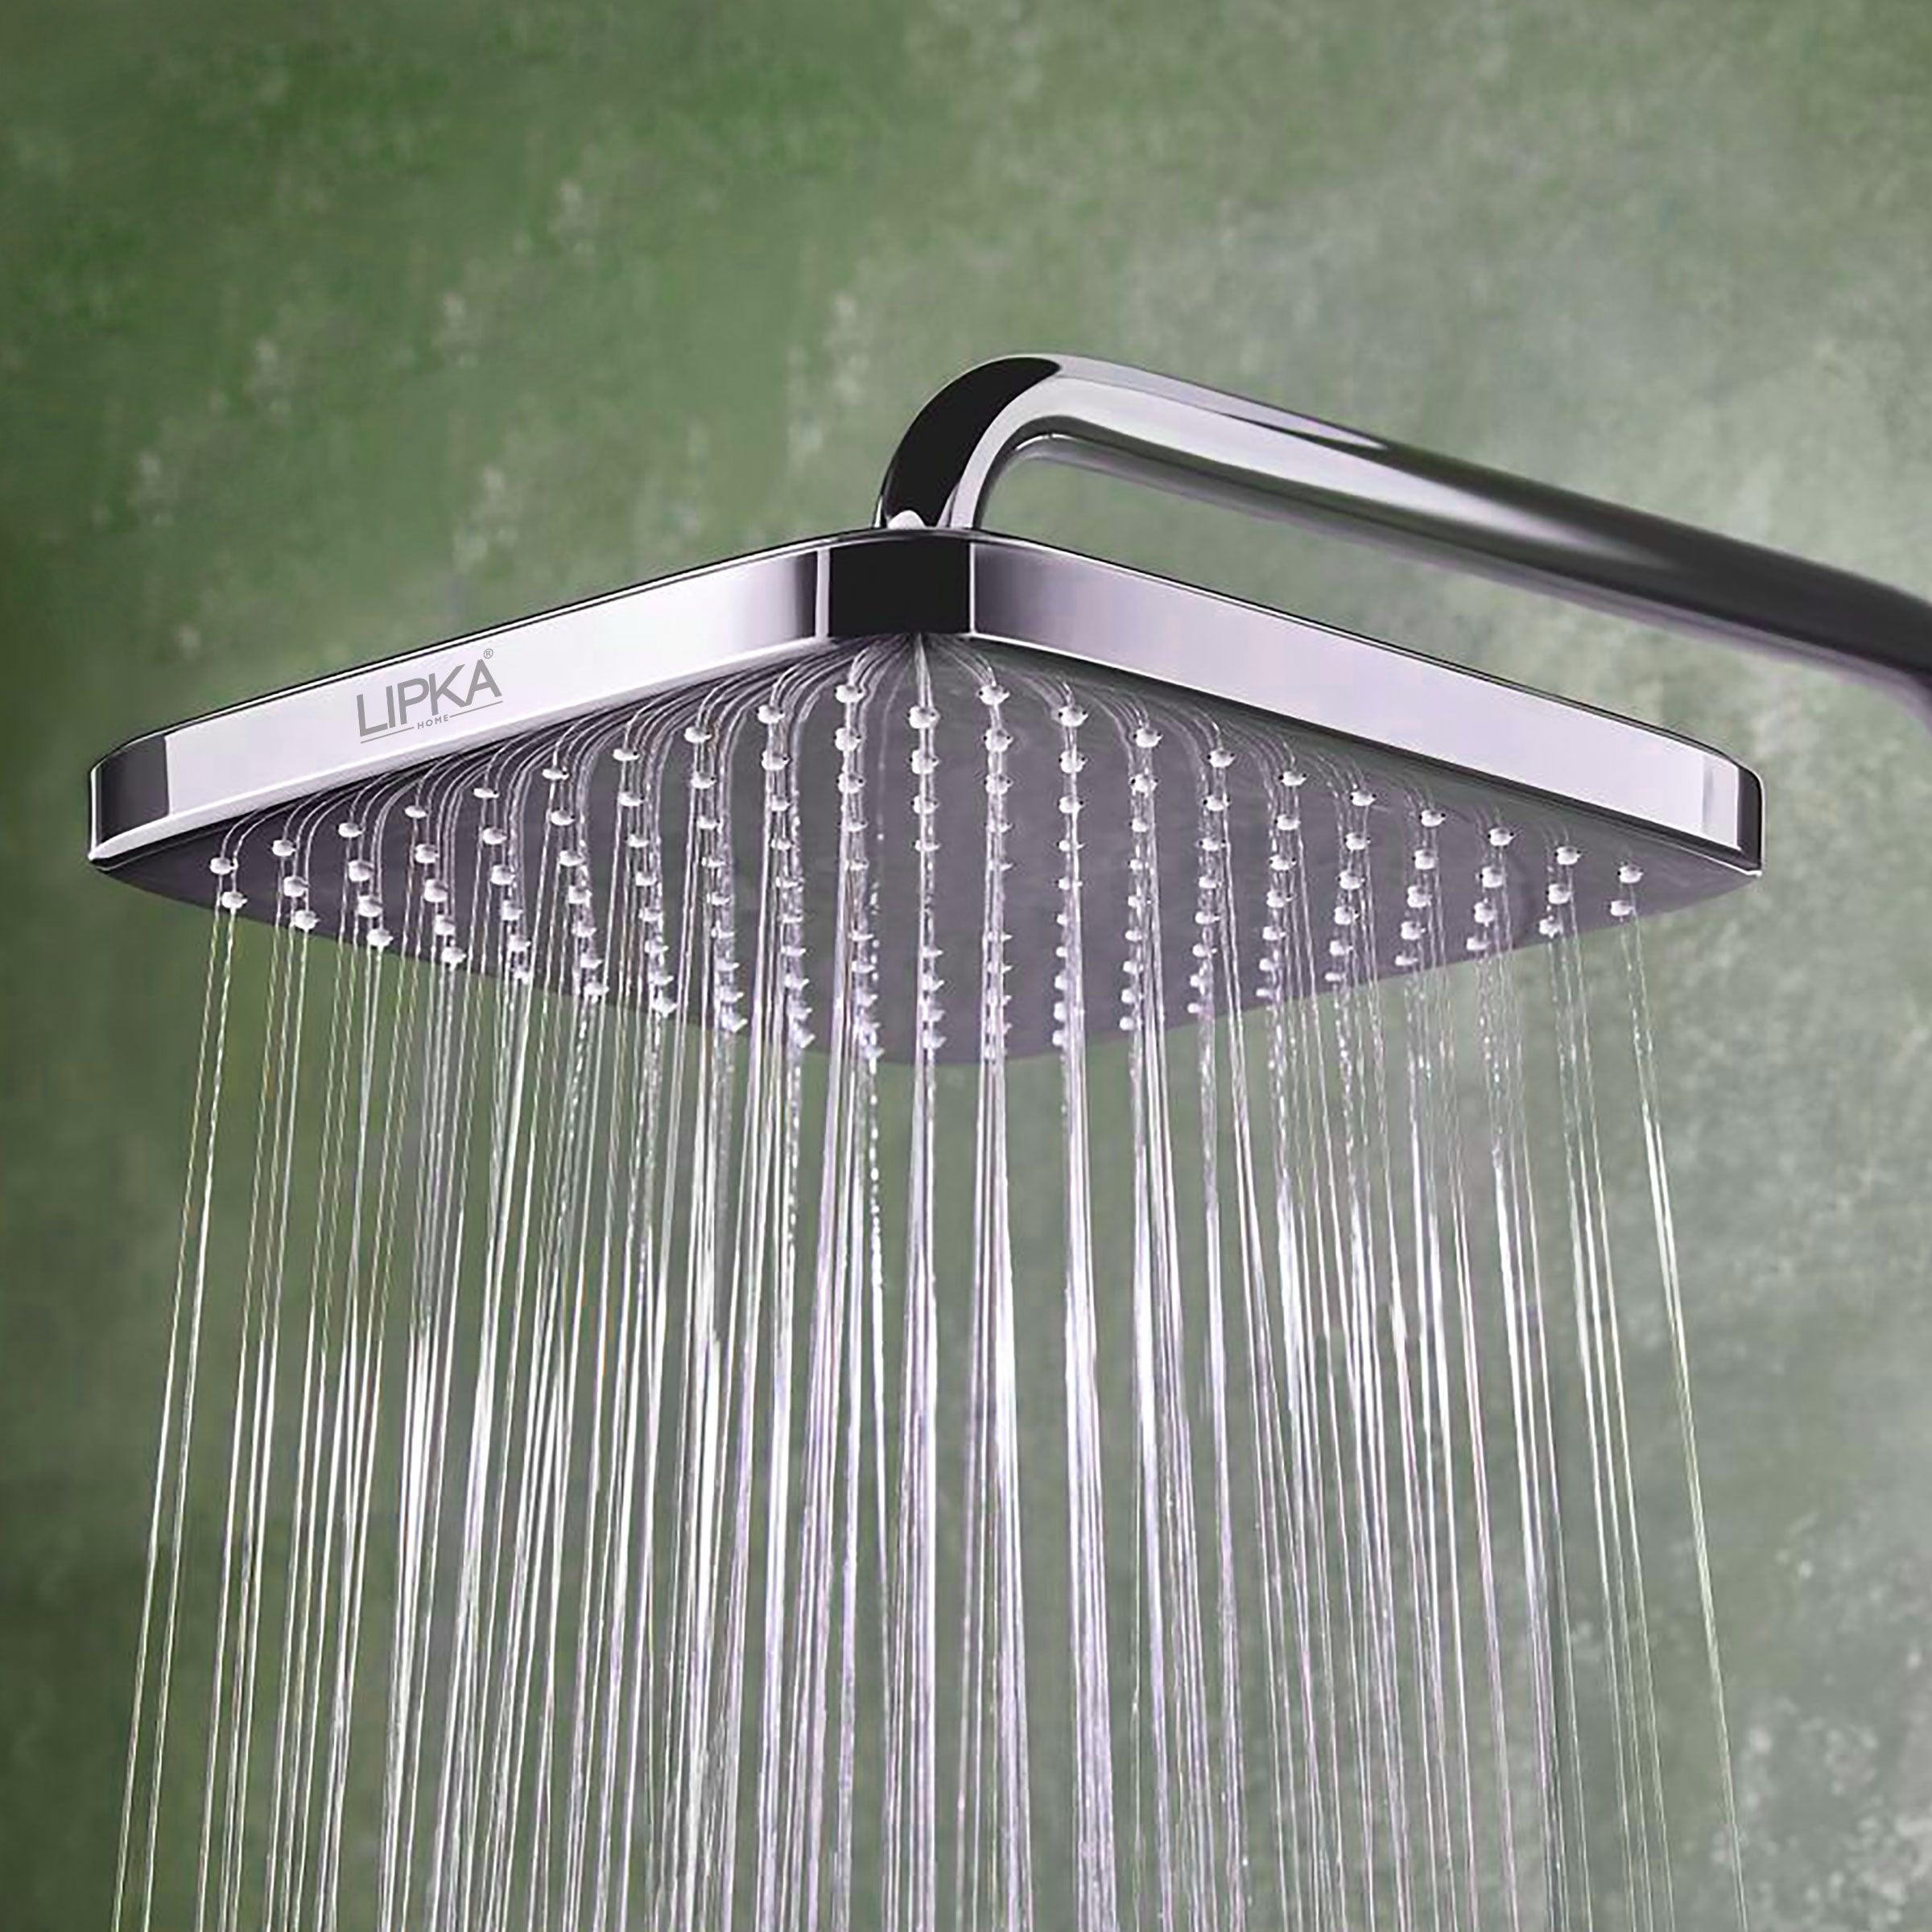 Pro Overhead Shower (4 x 4 Inches) lifestyle